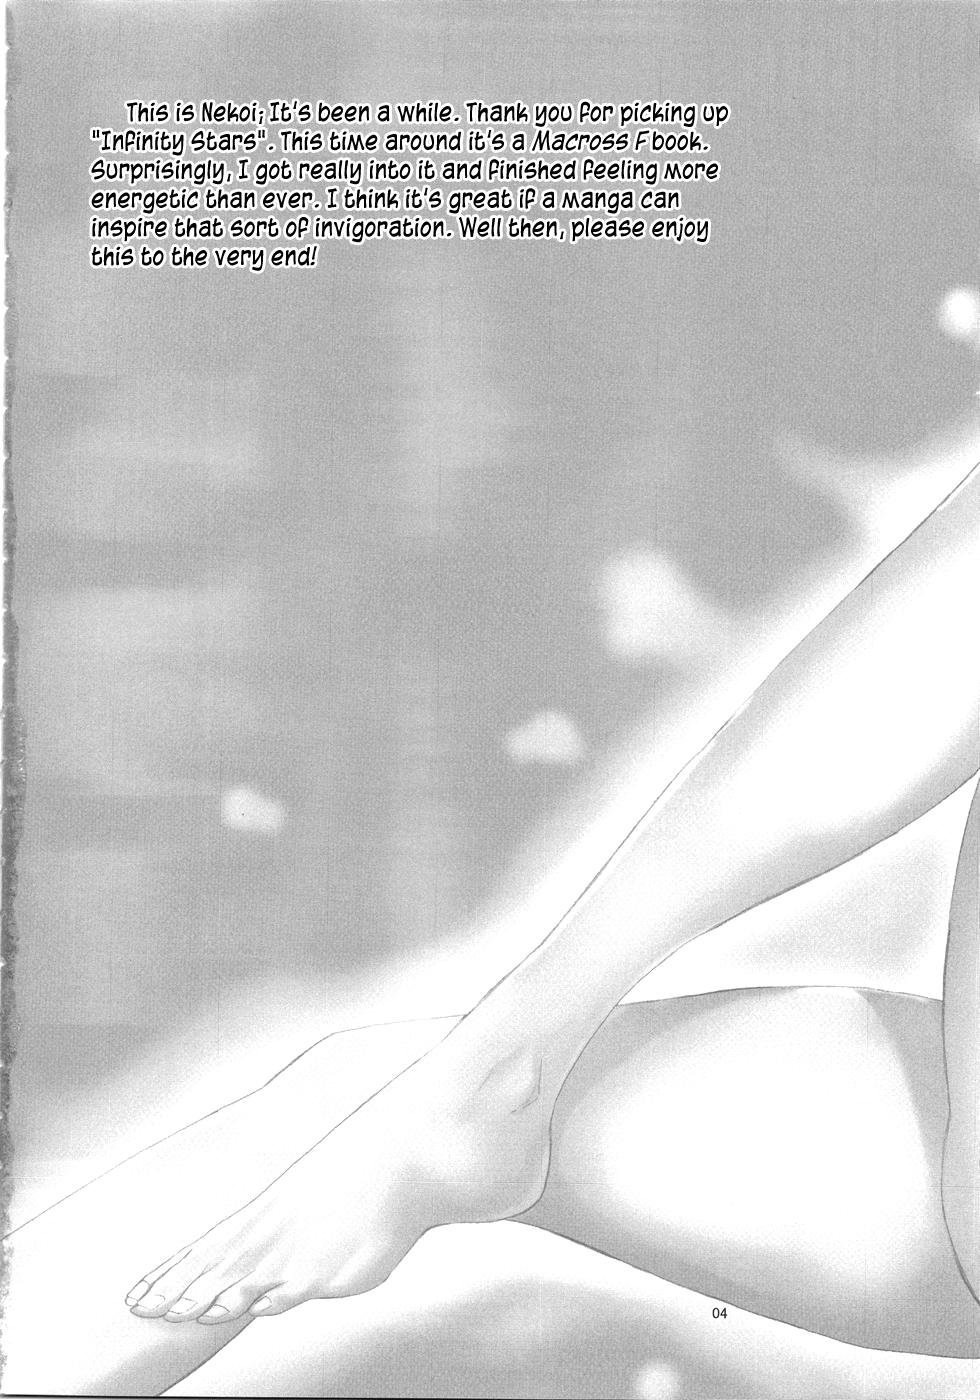 Ginger Infinity Stars - Macross frontier Stretch - Page 4